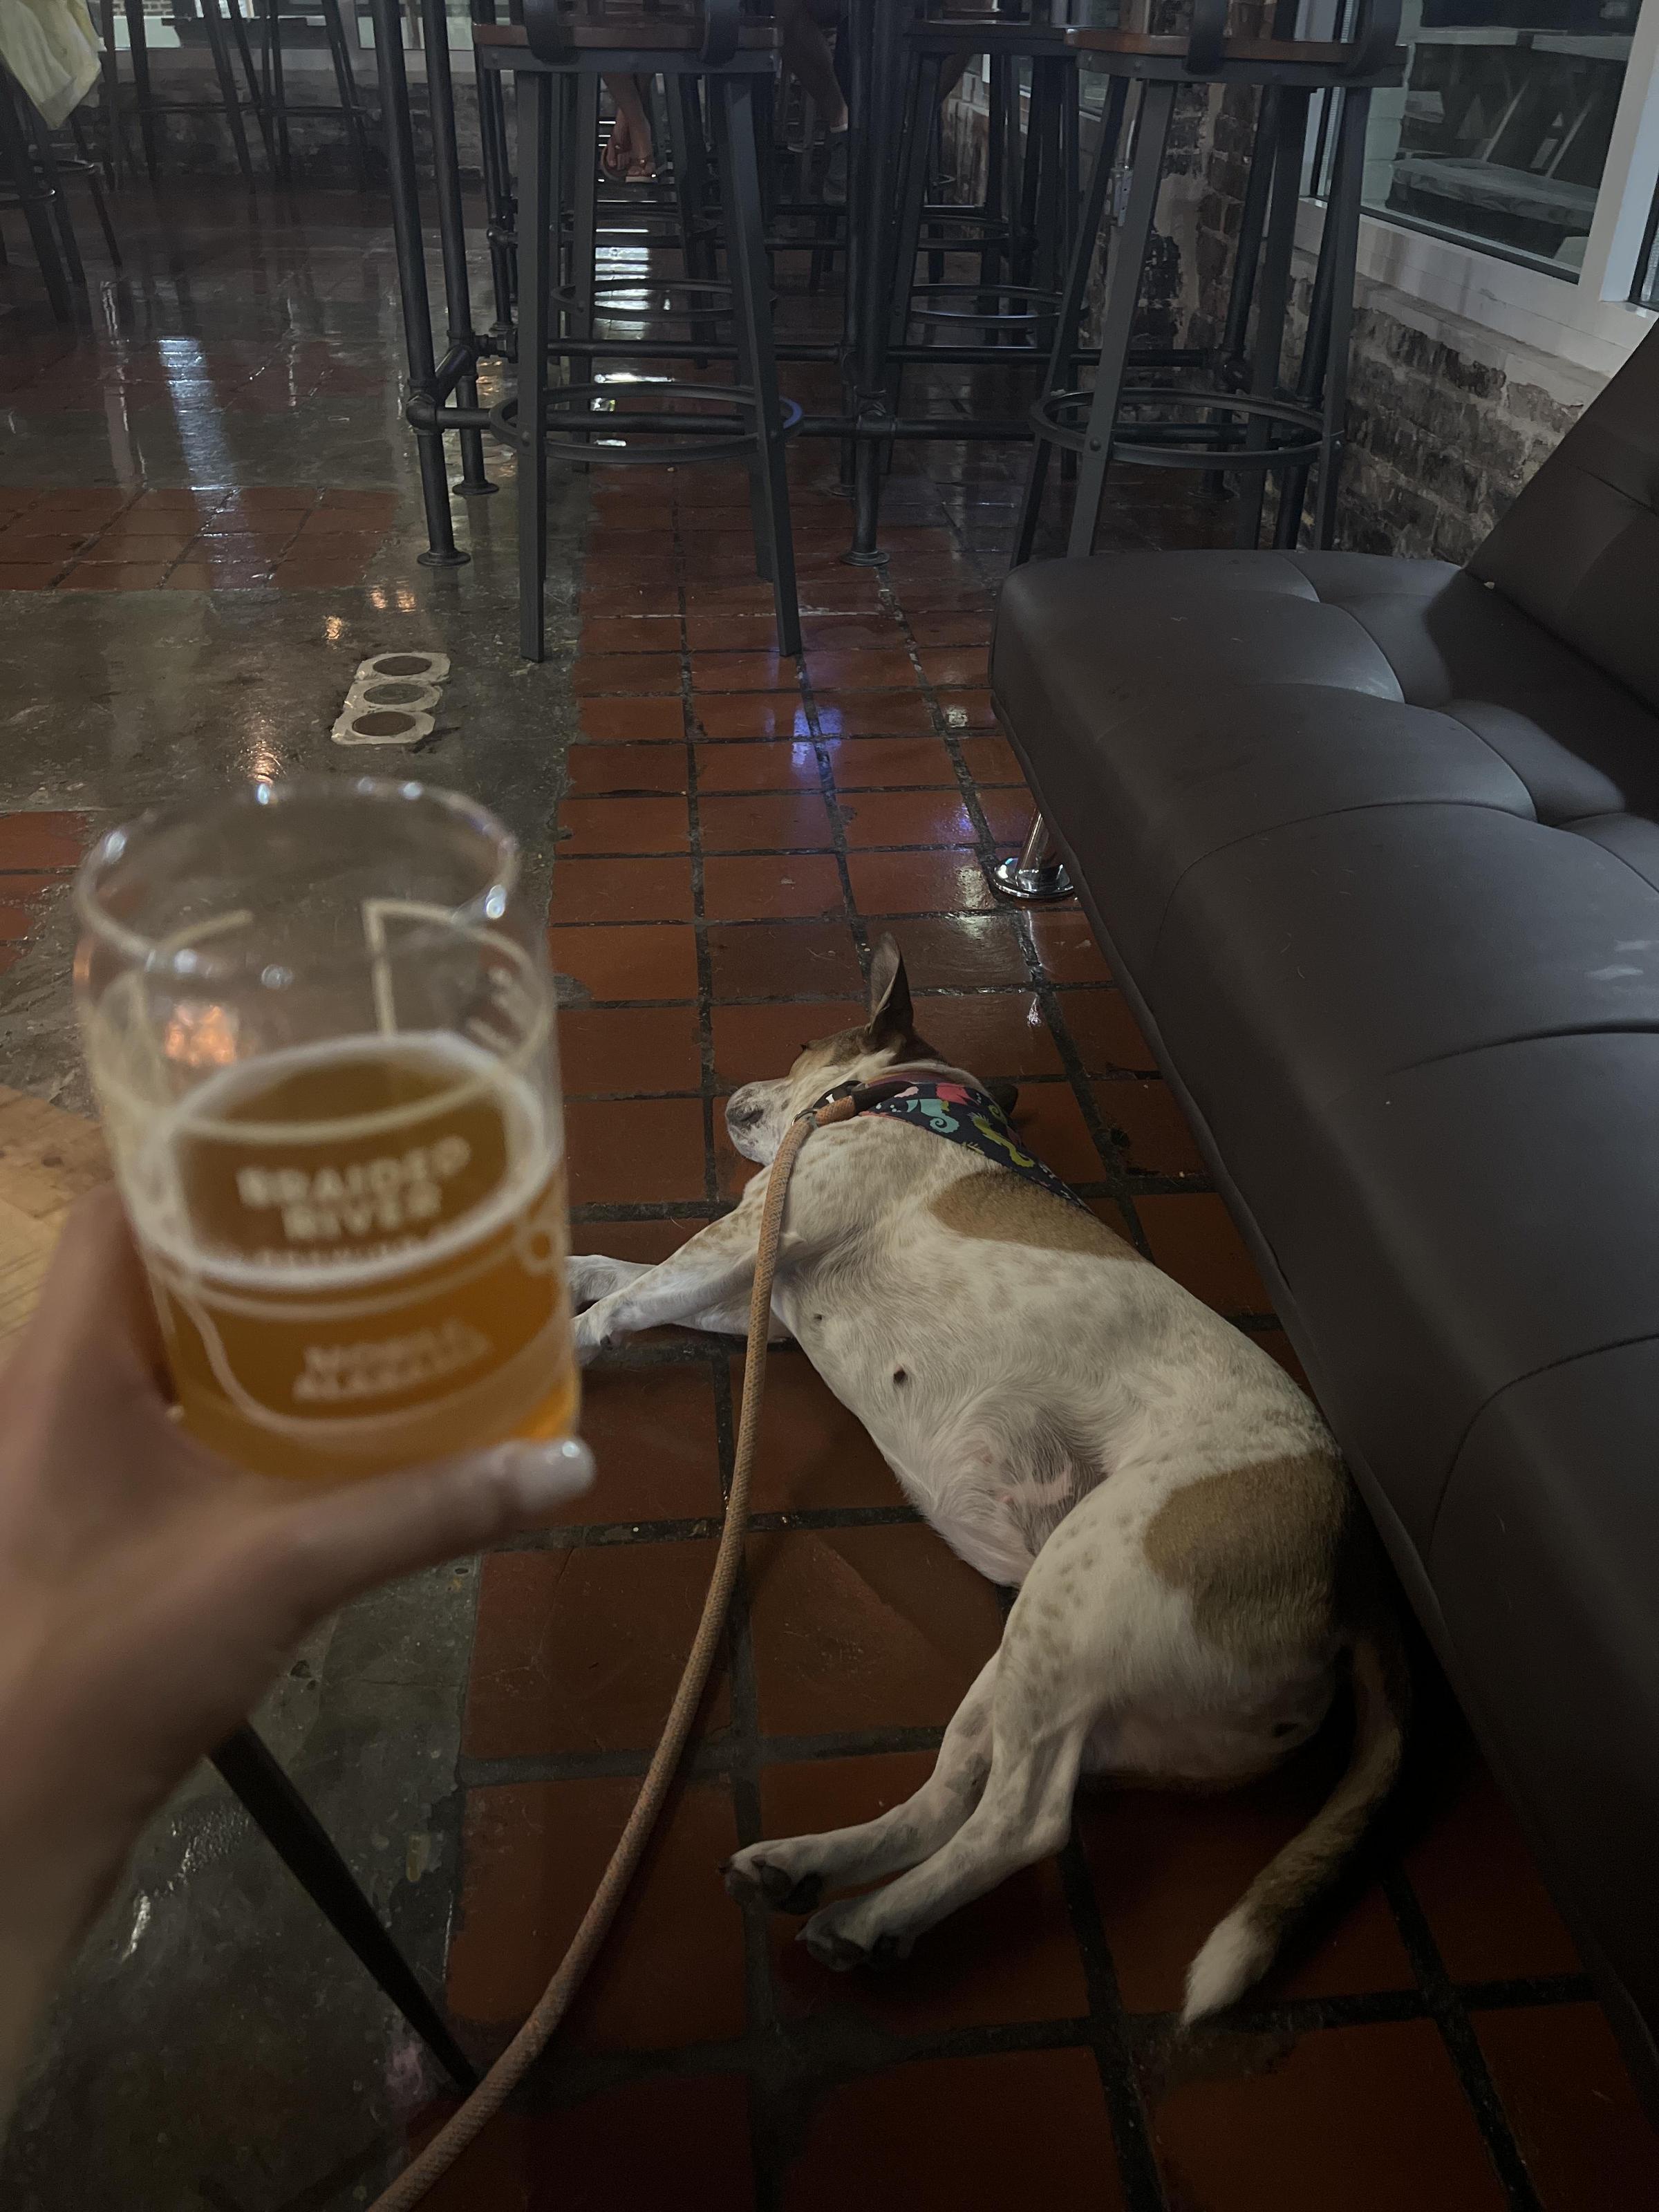 Pet Friendly Braided River Brewing Company